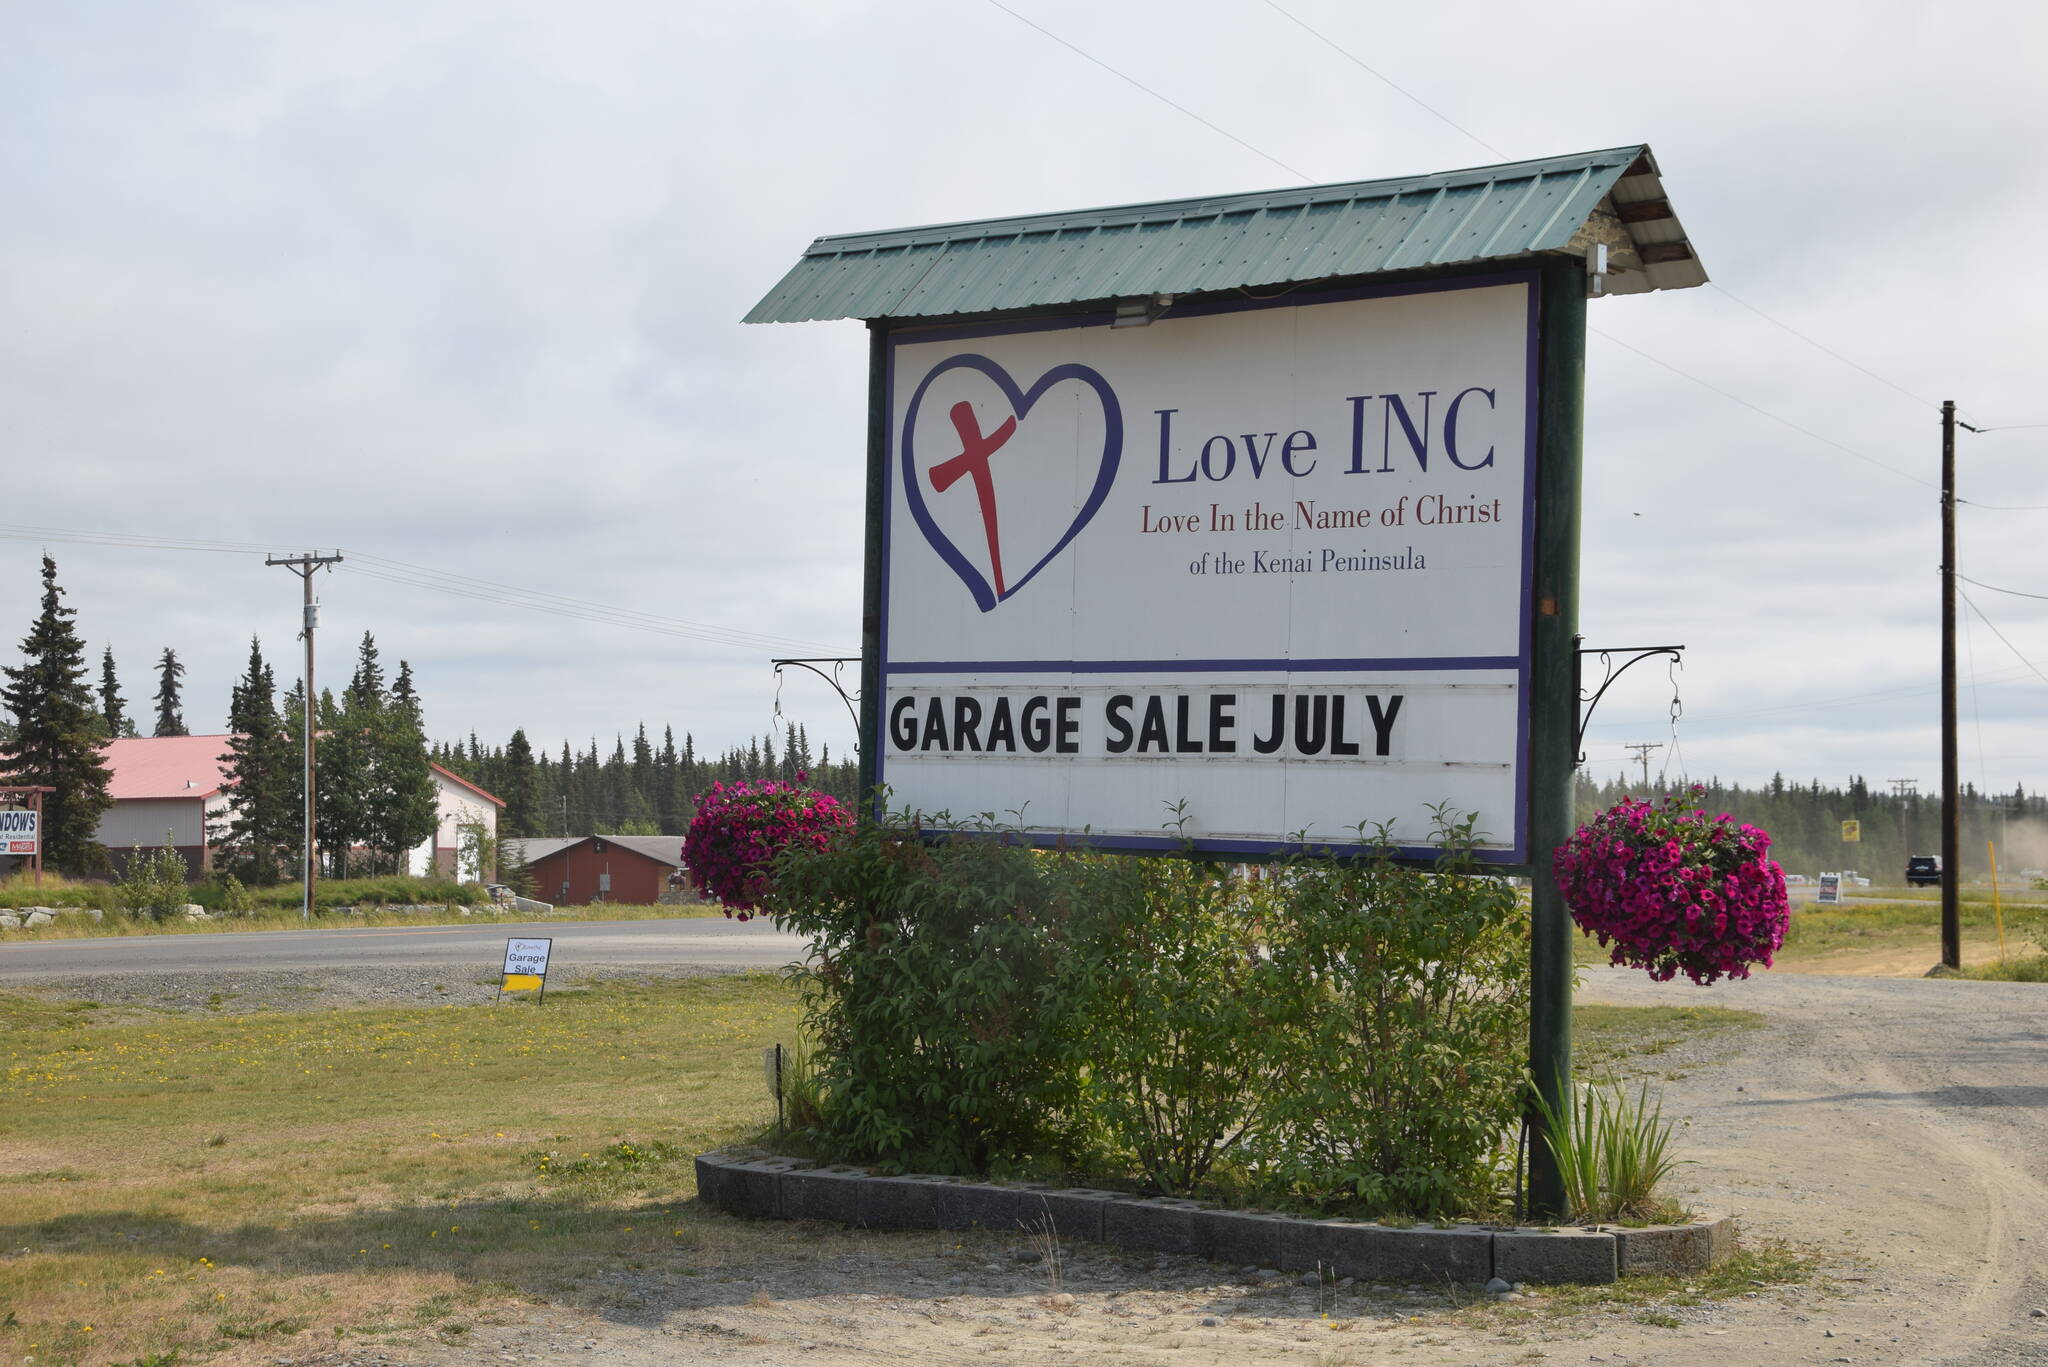 Love, INC in Soldotna, Alaska, provides homelessness prevention and housing services to people on the Kenai Peninsula. (Photo by Brian Mazurek/Peninsula Clarion)